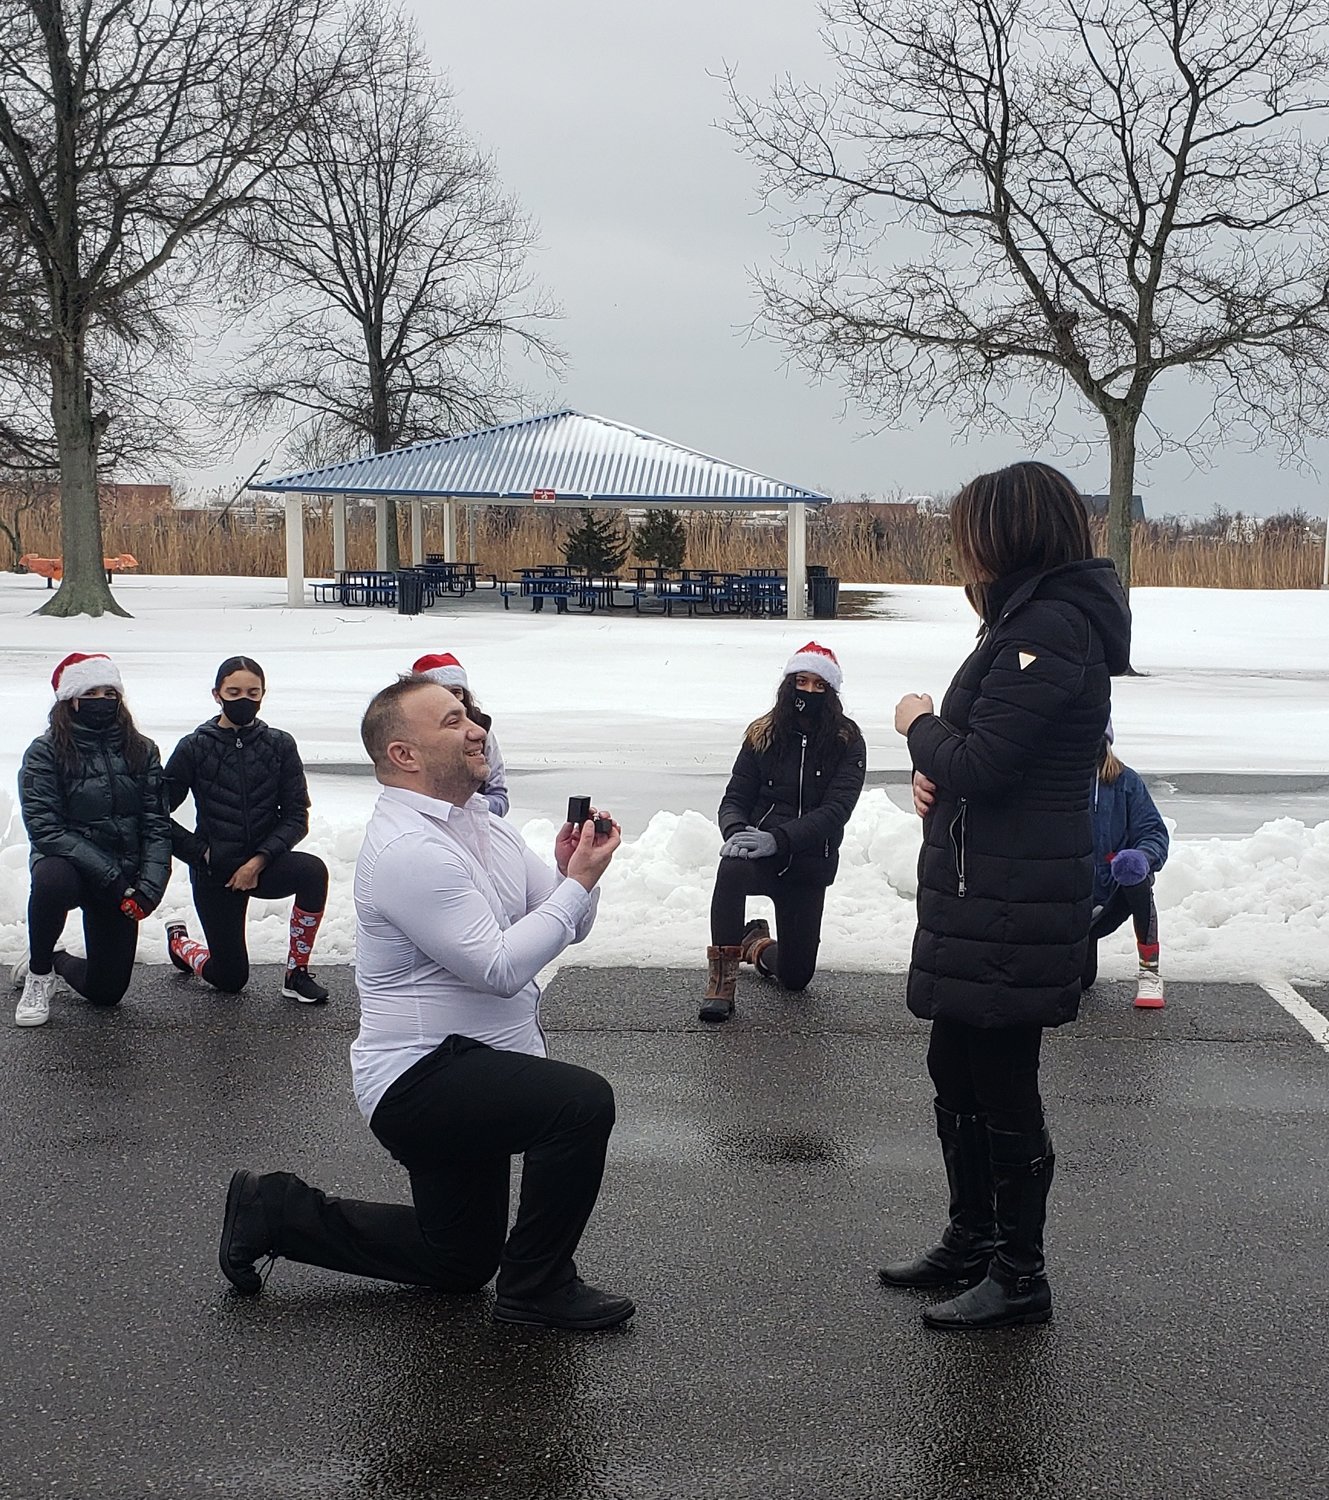 After the flash mob ended, Styron popped the question.